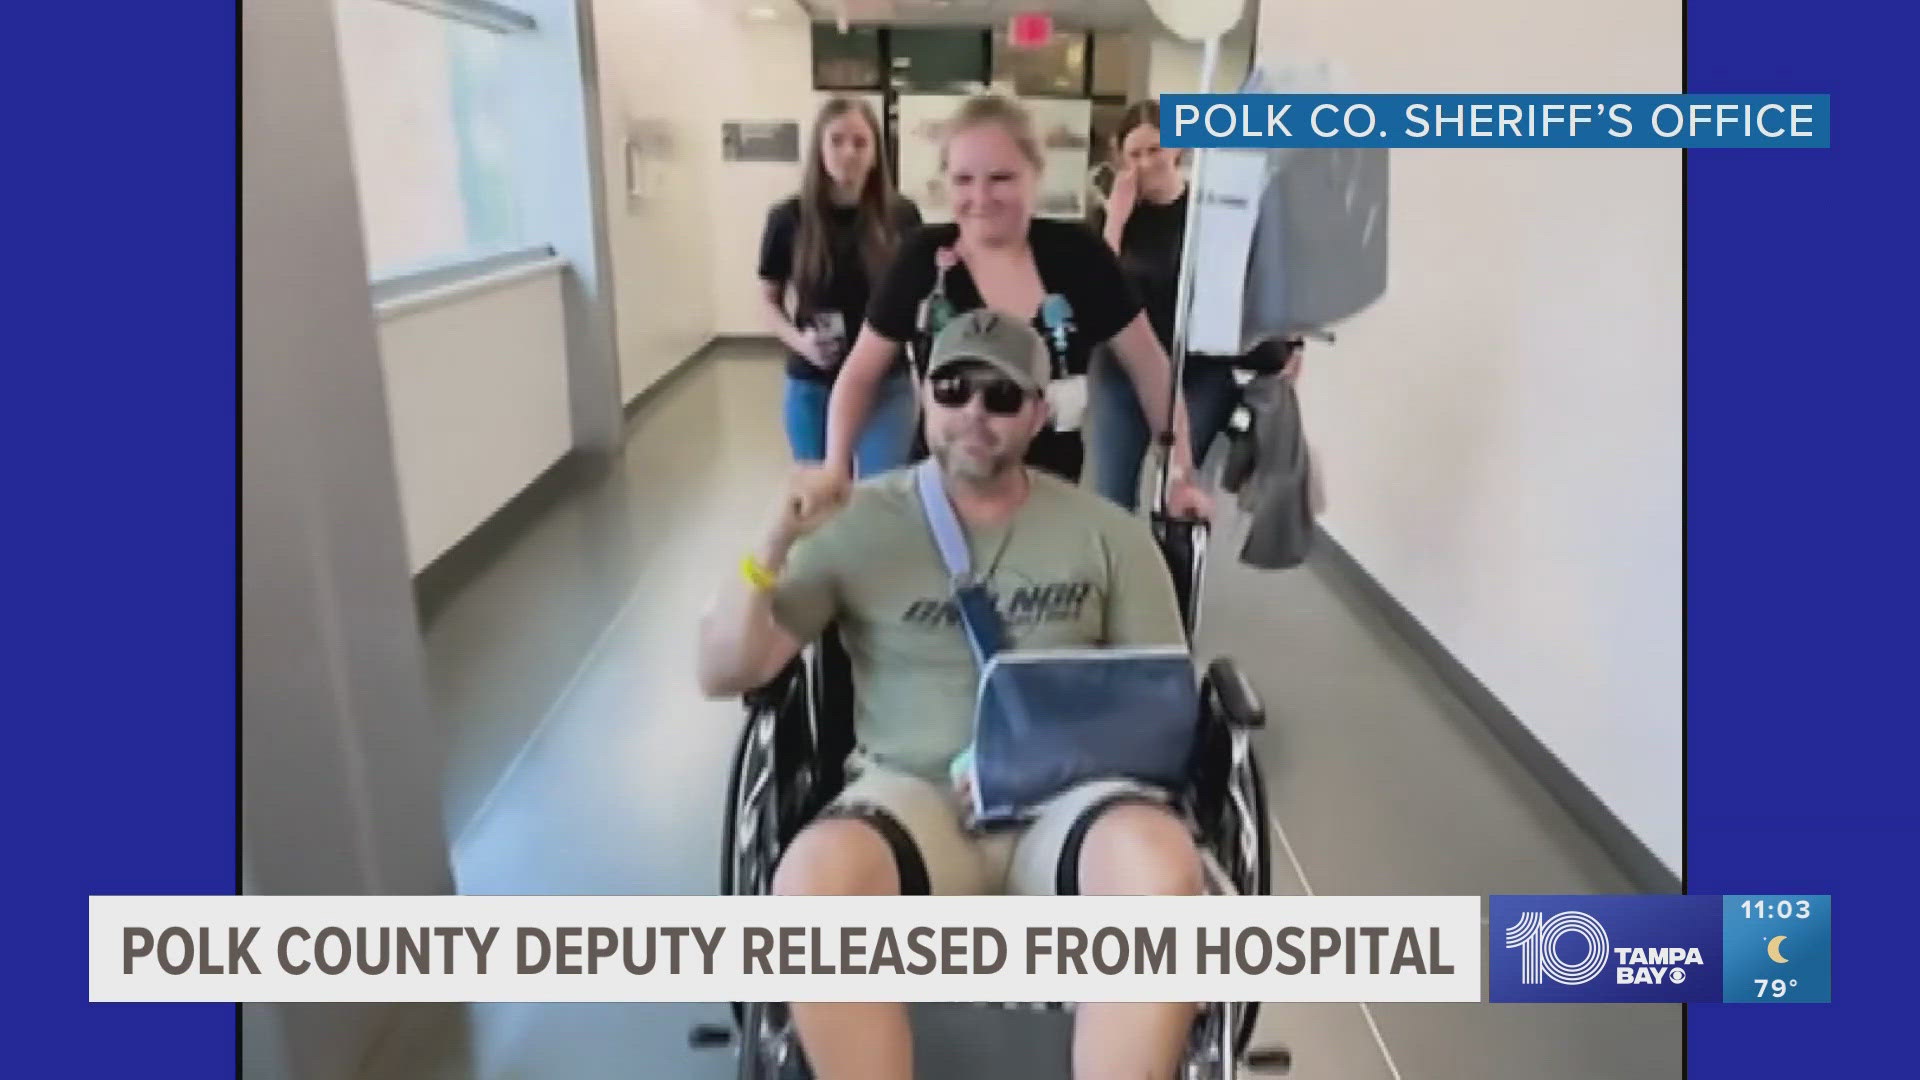 The sheriff's office shared footage of the emotional moment Lt. Chad Anderson was released from the hospital.